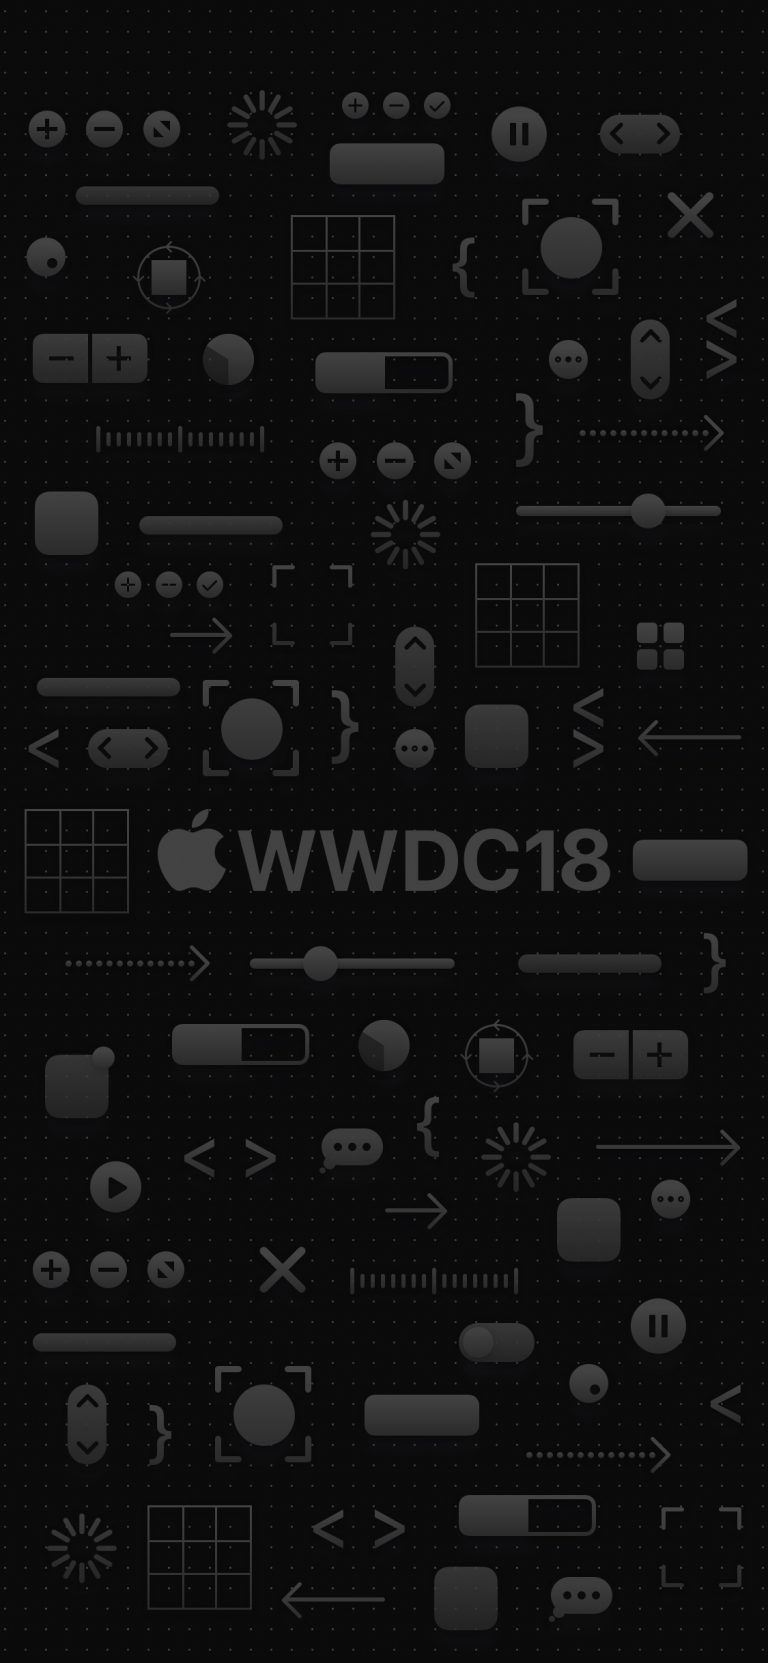 Cool iOS 13 Wallpaper Available for Free Download on any iPhone. Black wallpaper iphone, Smartphone wallpaper, iPhone wallpaper